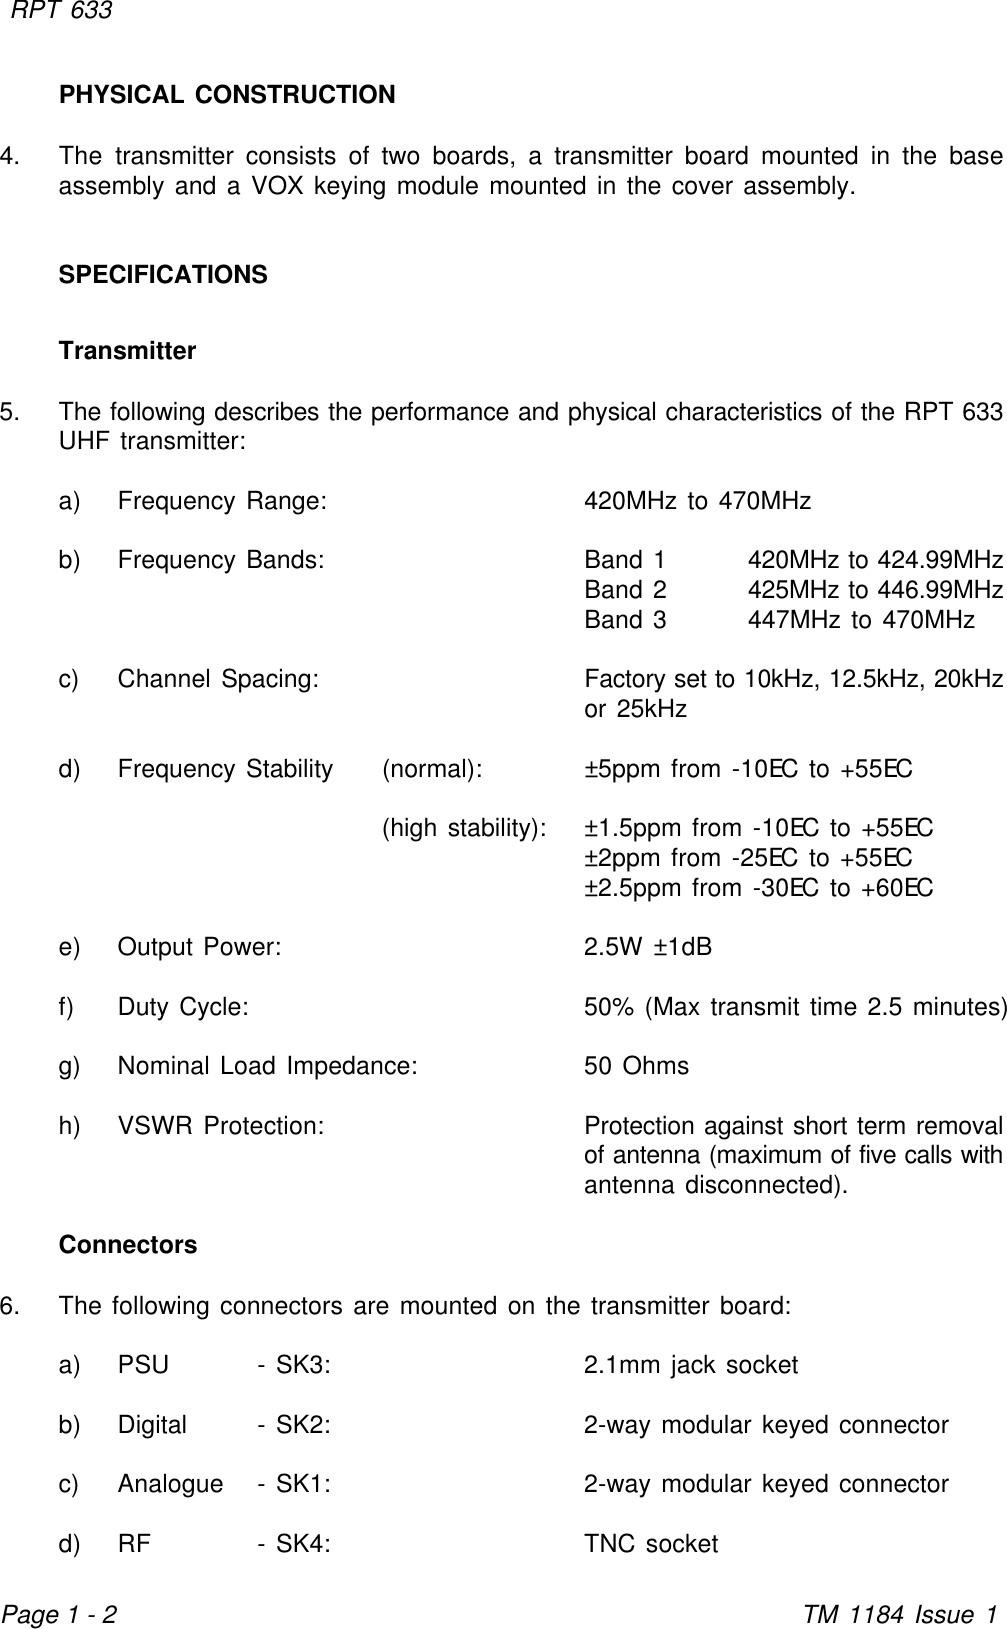 RPT 633TM 1184 Issue 1Page 1 - 2PHYSICAL CONSTRUCTION4. The transmitter consists of two boards, a transmitter board mounted in the baseassembly and a VOX keying module mounted in the cover assembly.SPECIFICATIONSTransmitter5. The following describes the performance and physical characteristics of the RPT 633UHF transmitter:a) Frequency Range: 420MHz to 470MHzb) Frequency Bands: Band 1420MHz to 424.99MHzBand 2425MHz to 446.99MHzBand 3447MHz to 470MHzc) Channel Spacing: Factory set to 10kHz, 12.5kHz, 20kHzor 25kHzd) Frequency Stability (normal): ±5ppm from -10EC to +55EC(high stability): ±1.5ppm from -10EC to +55EC±2ppm from -25EC to +55EC±2.5ppm from -30EC to +60ECe) Output Power: 2.5W ±1dBf) Duty Cycle: 50% (Max transmit time 2.5 minutes)g) Nominal Load Impedance: 50 Ohmsh) VSWR Protection: Protection against short term removalof antenna (maximum of five calls withantenna disconnected).Connectors6. The following connectors are mounted on the transmitter board:a) PSU - SK3: 2.1mm jack socketb) Digital - SK2: 2-way modular keyed connectorc) Analogue - SK1: 2-way modular keyed connectord) RF - SK4: TNC socket